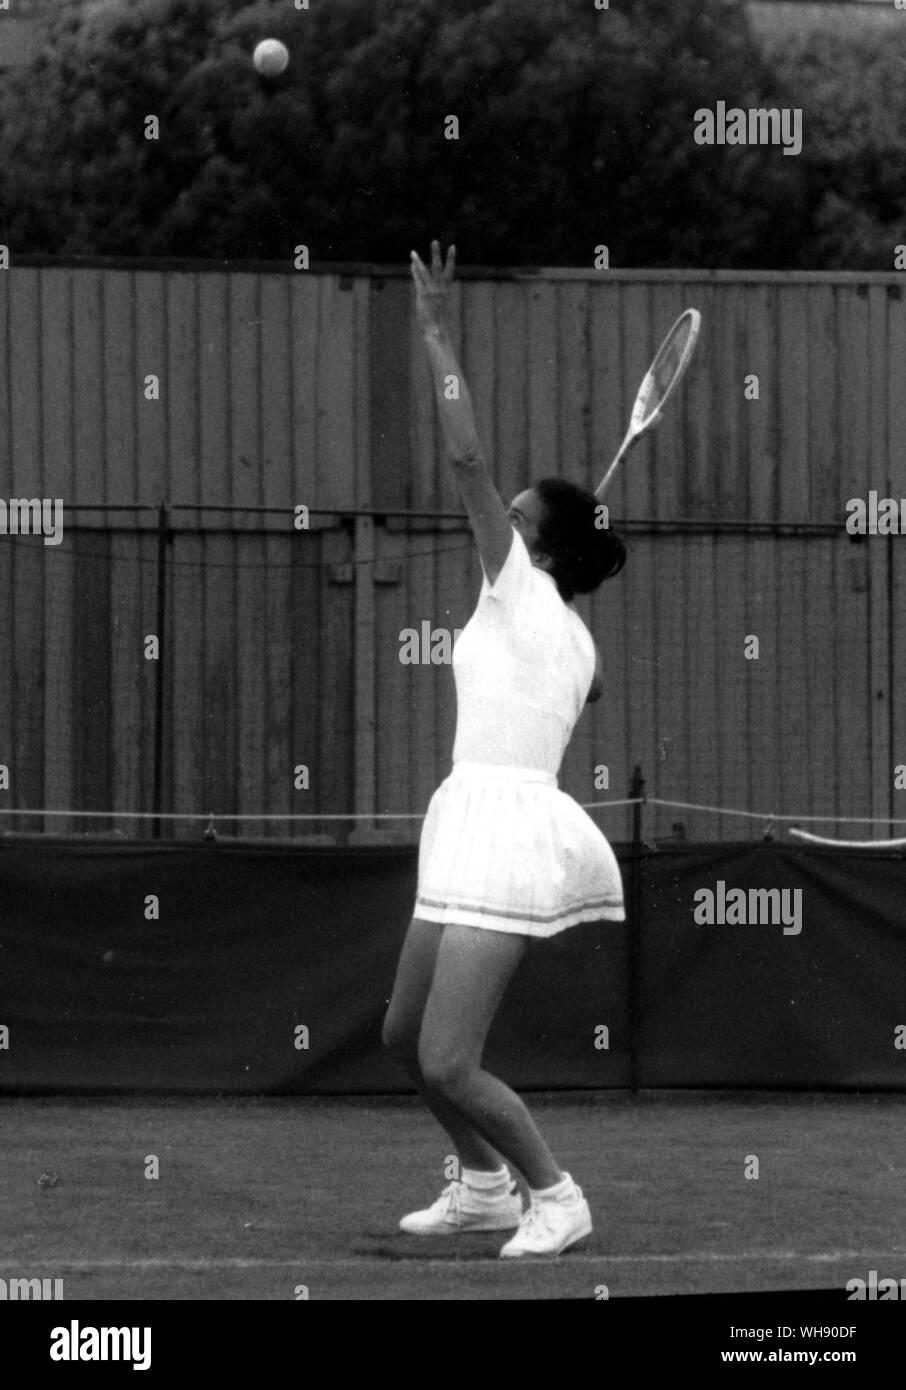 Virginia Wade serves the ball in a practice session.Virginia won Wimbledon in 1977.. Stock Photo